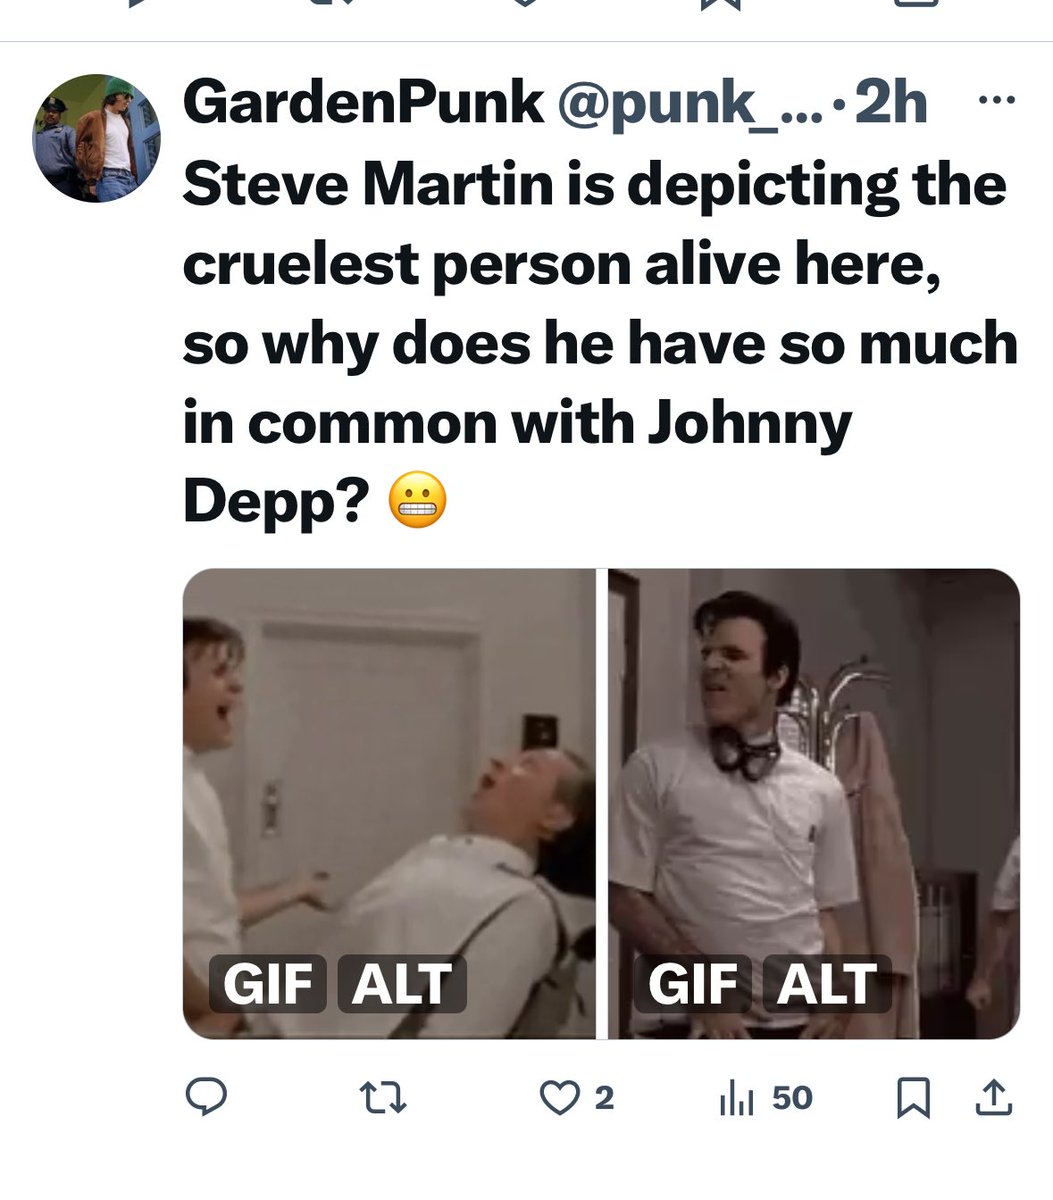 😂😂😂😂😂😂
#LittleShopOfHorrors
#JohnnyDeppWon and you all need to get over it 😘